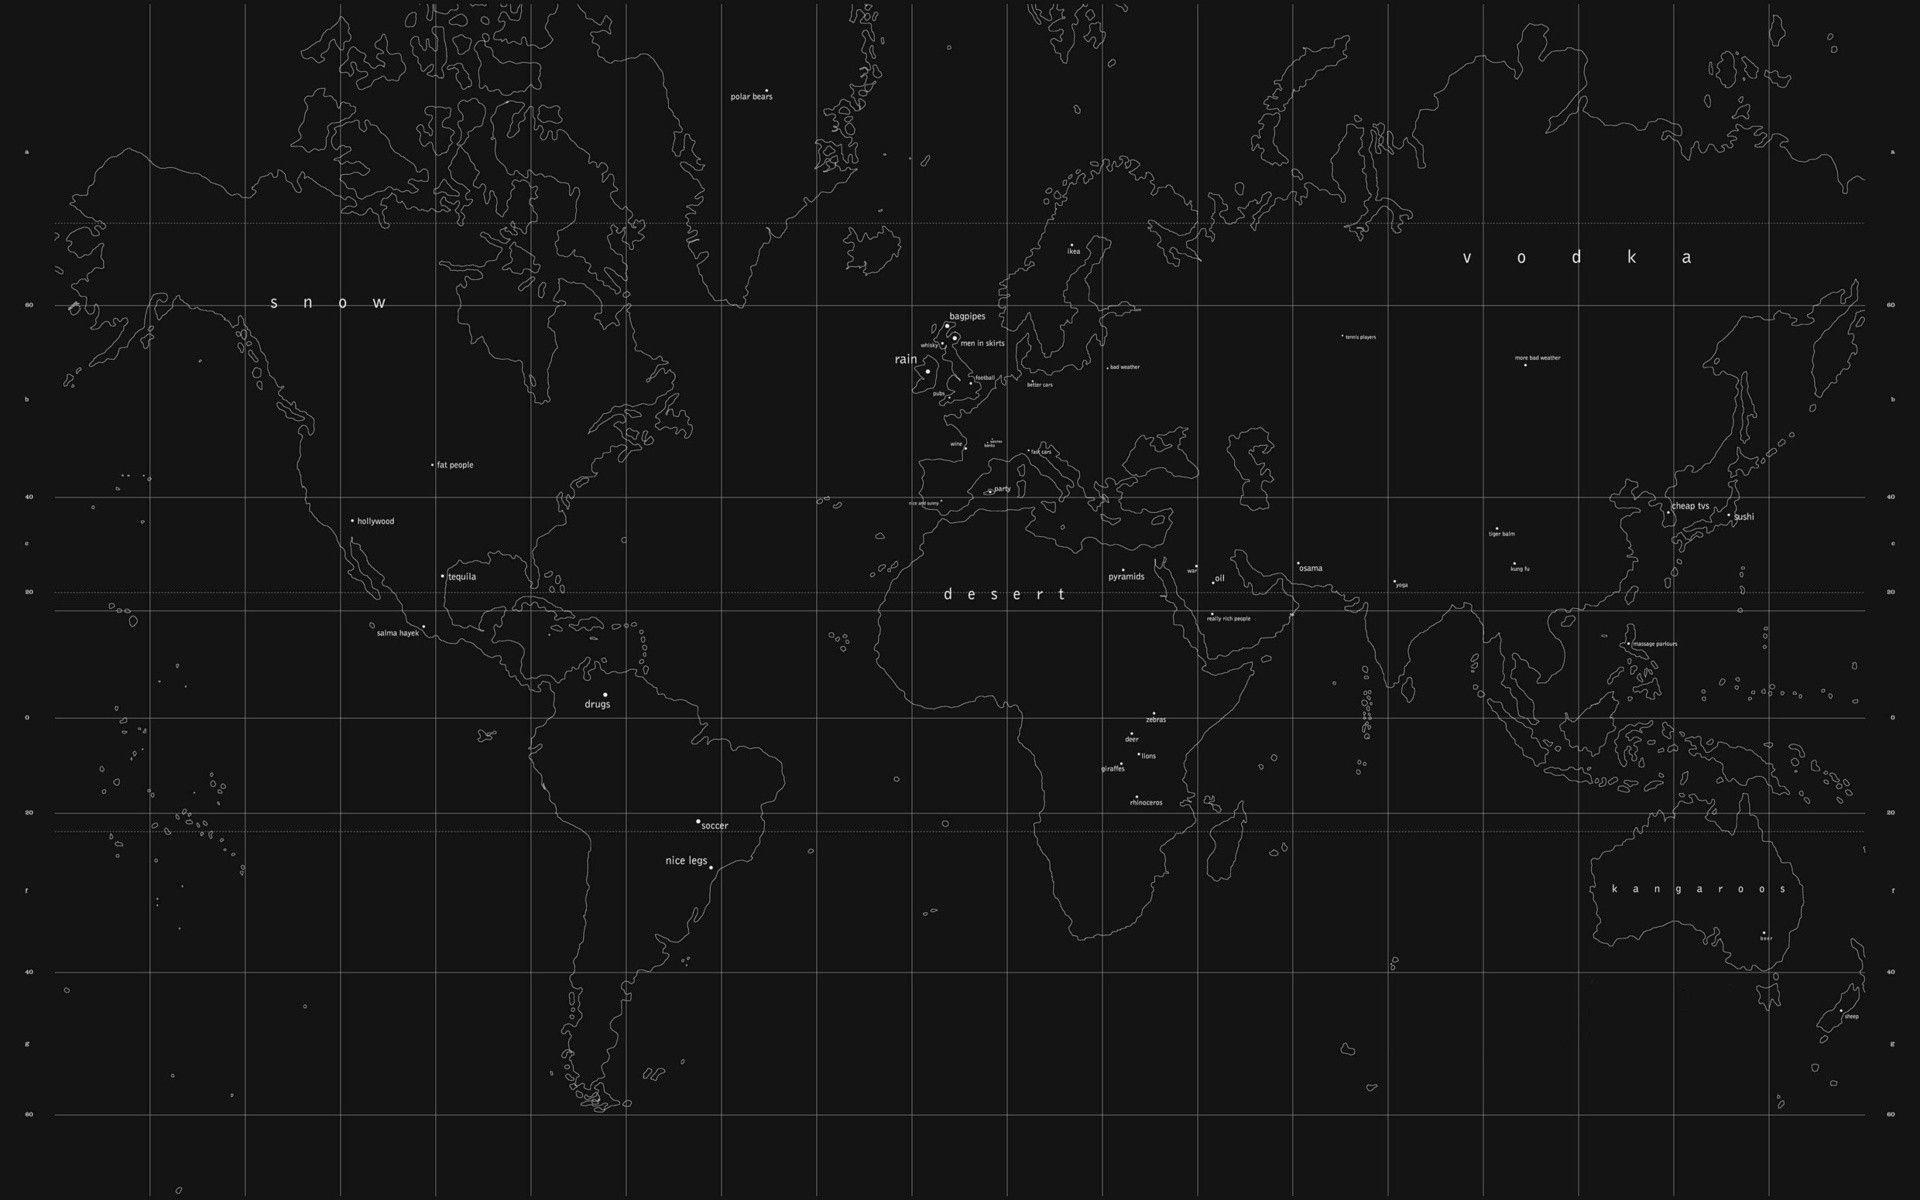 World Map Mural Black And White Fresh World Time Zones Wall Map